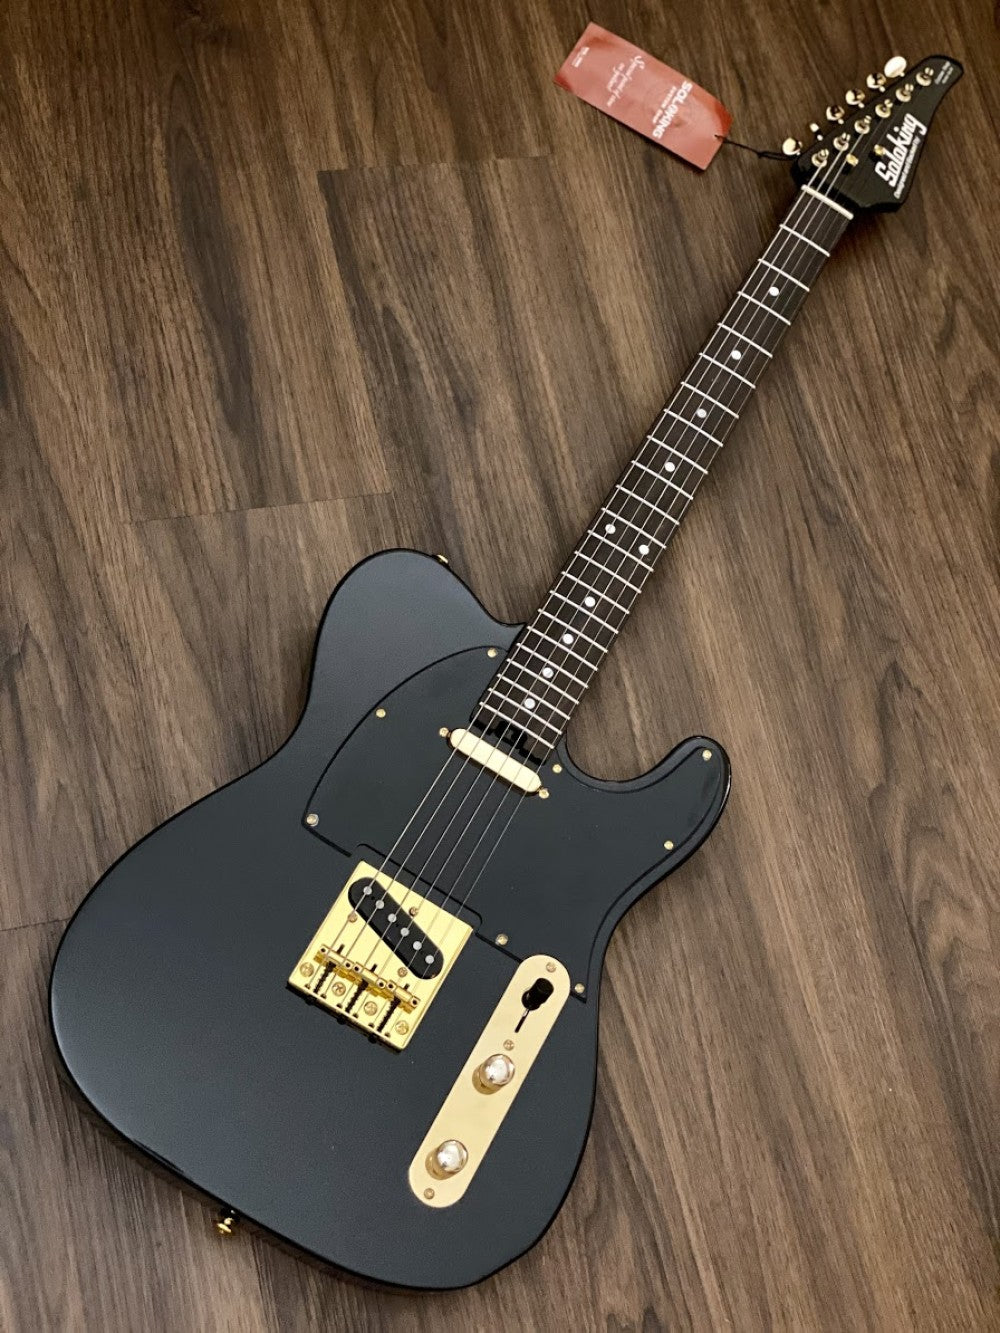 Soloking MT-1G MKII in Black Beauty with Gold Hardware and Roasted Maple Neck 電結他/吉他